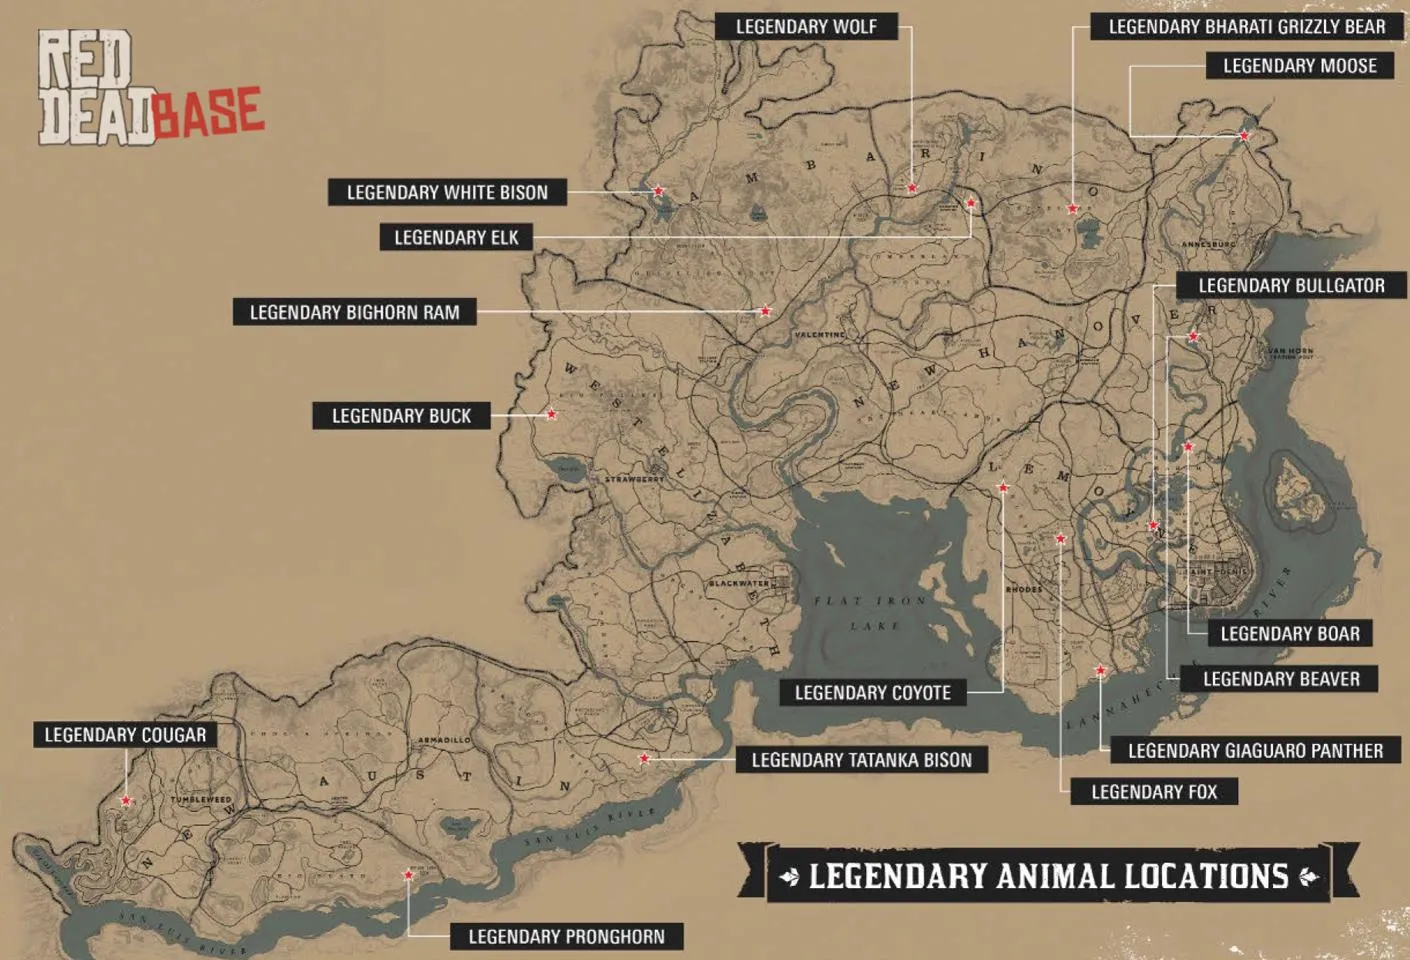 Legendary Giaguaro Panther - Map Location in RDR2